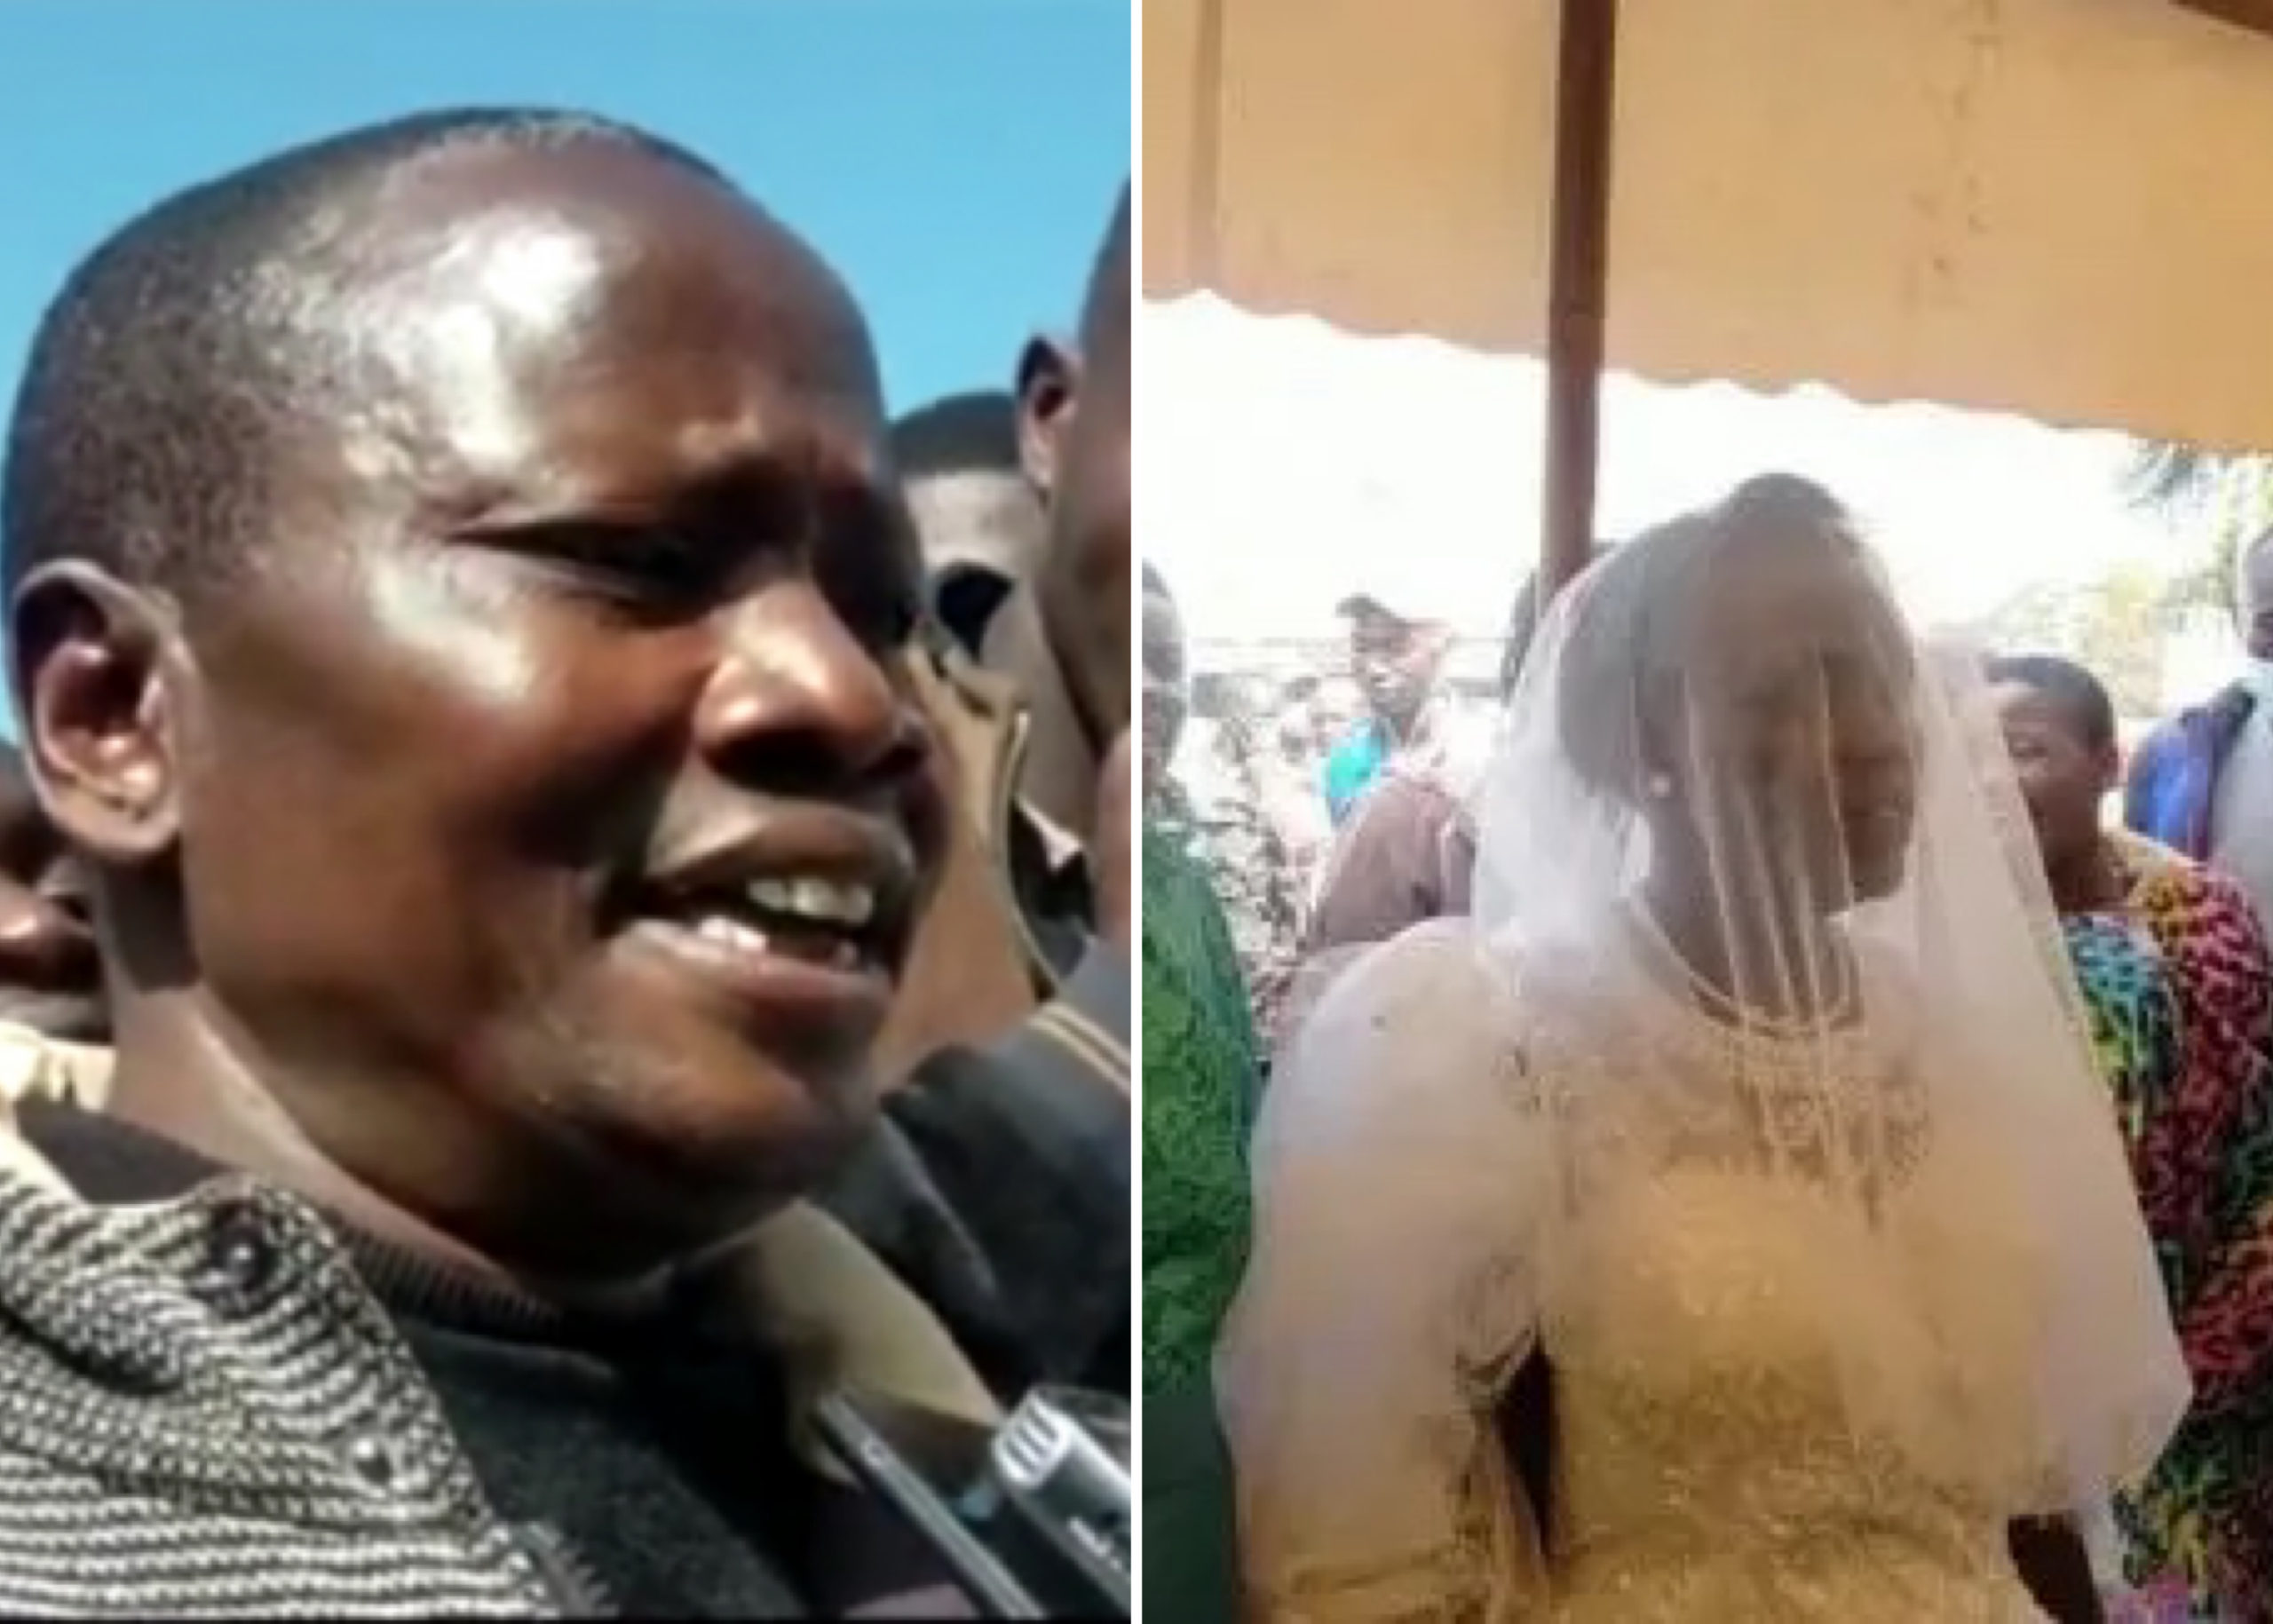 Mother Of 6 Dumps Husband Of 20 Years To Marry ‘Holy Spirit’, Goes To Uganda For Honeymoon